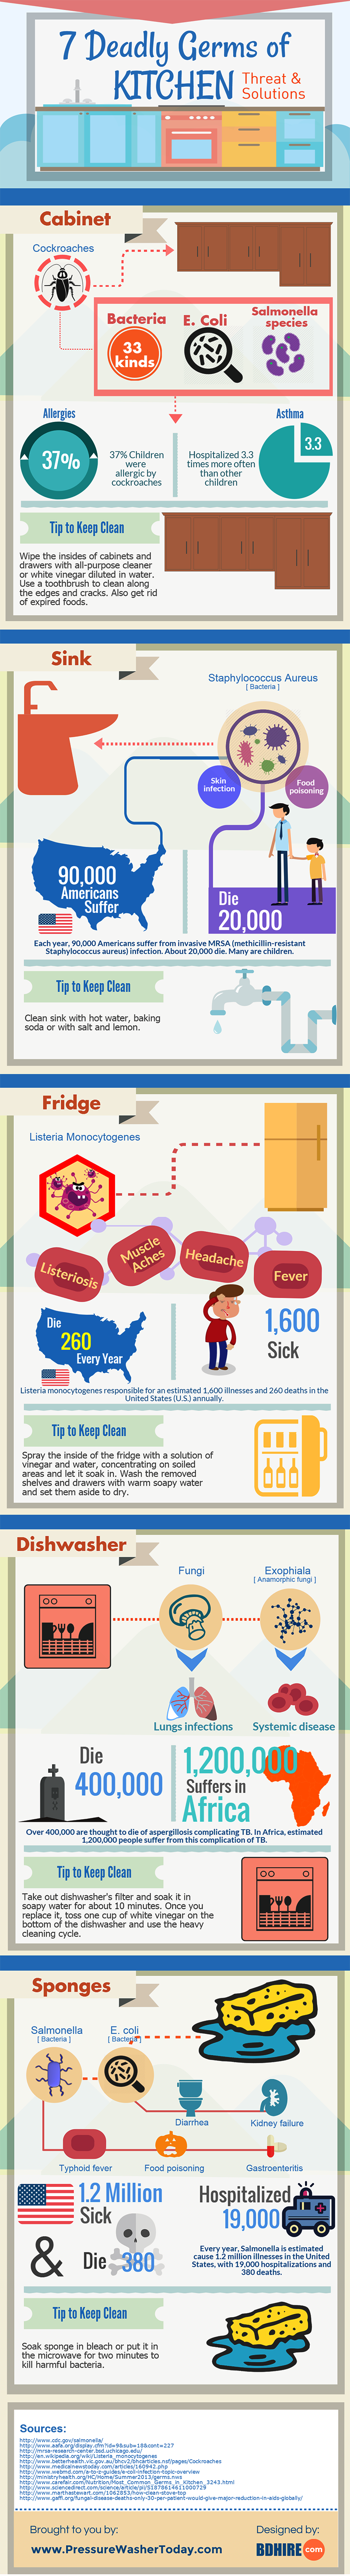 germs-in-the-kitchen-Infographic